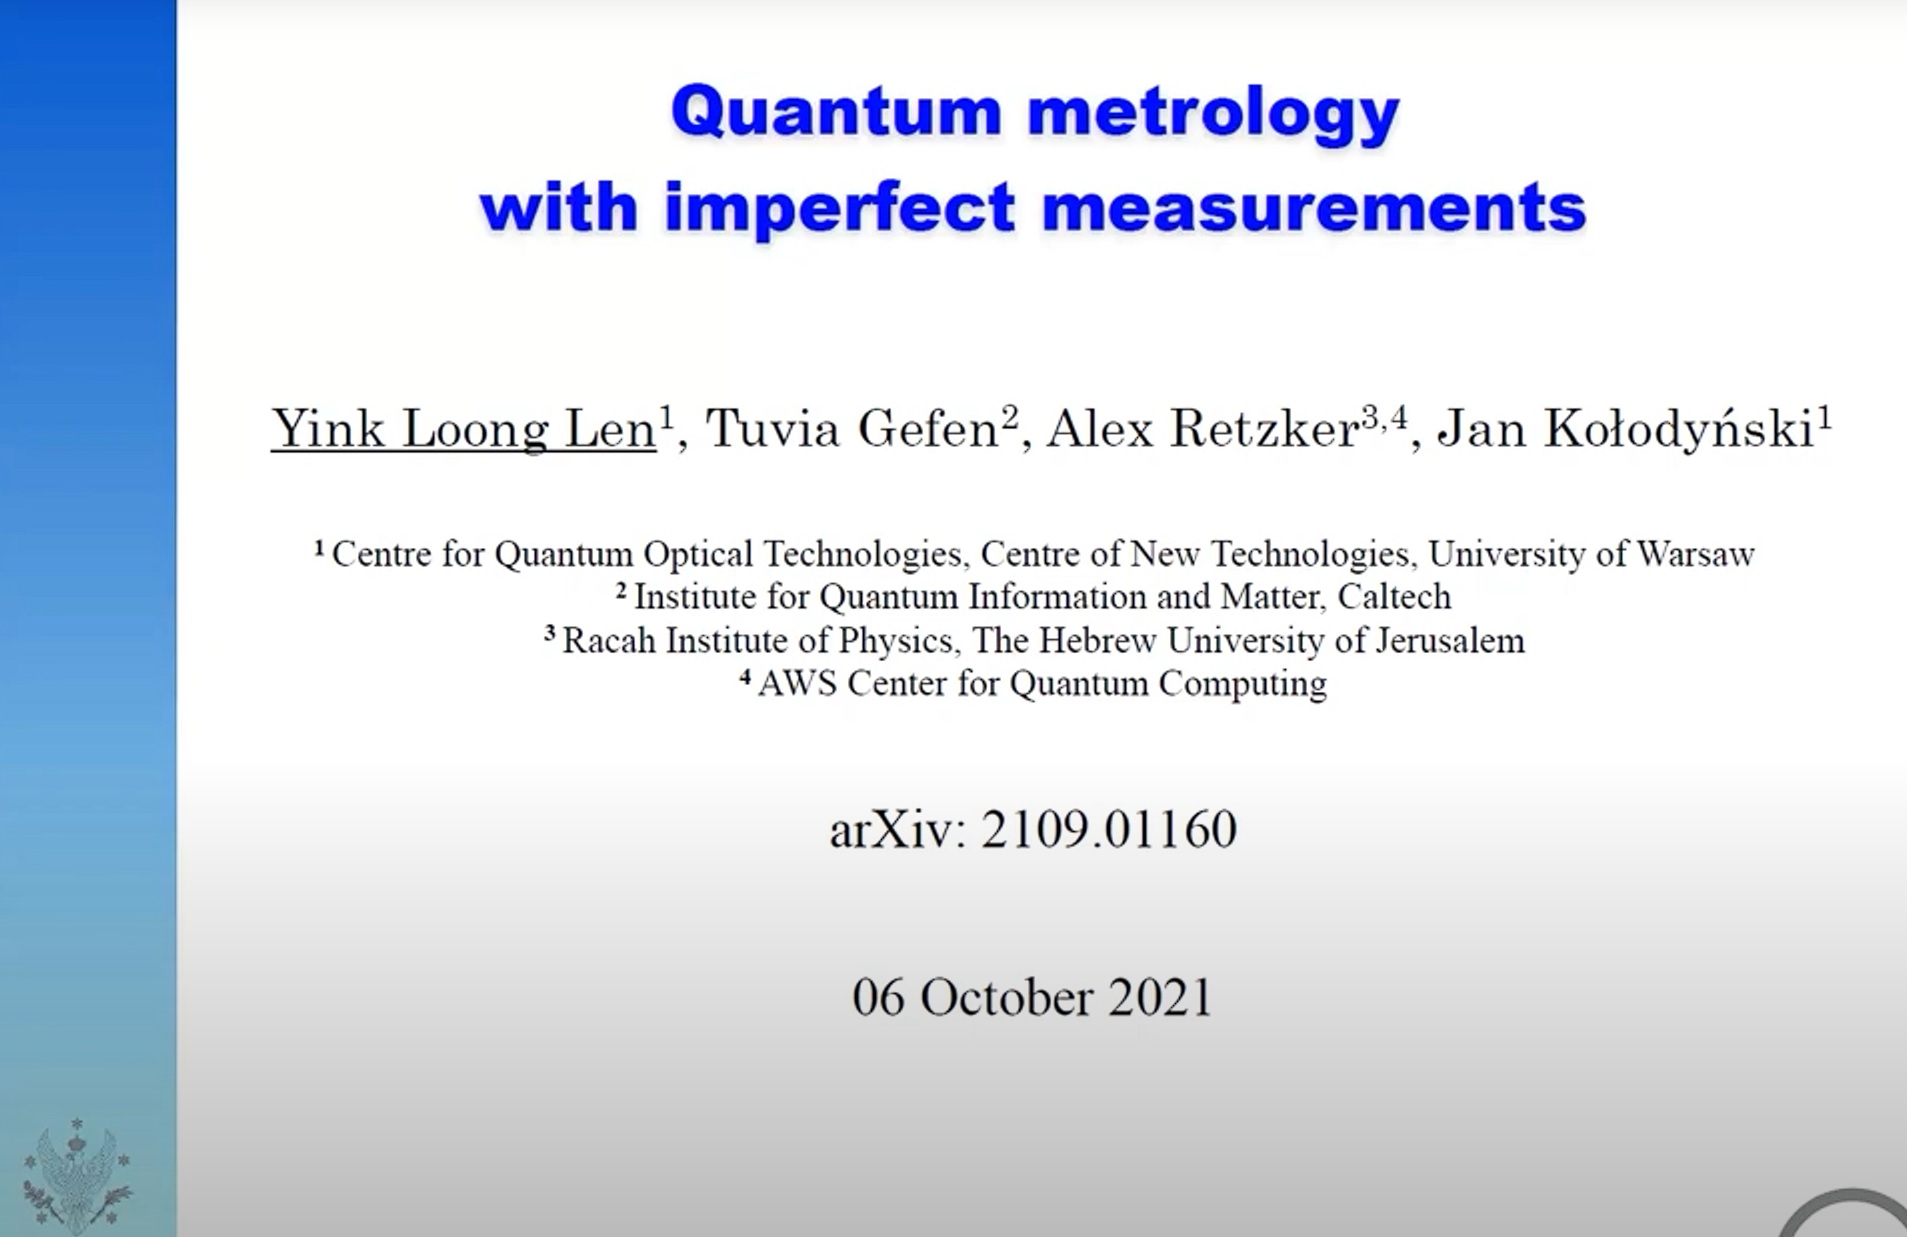 Yink Loong Len (University of Warsaw): Quantum Metrology with Imperfect Measurements